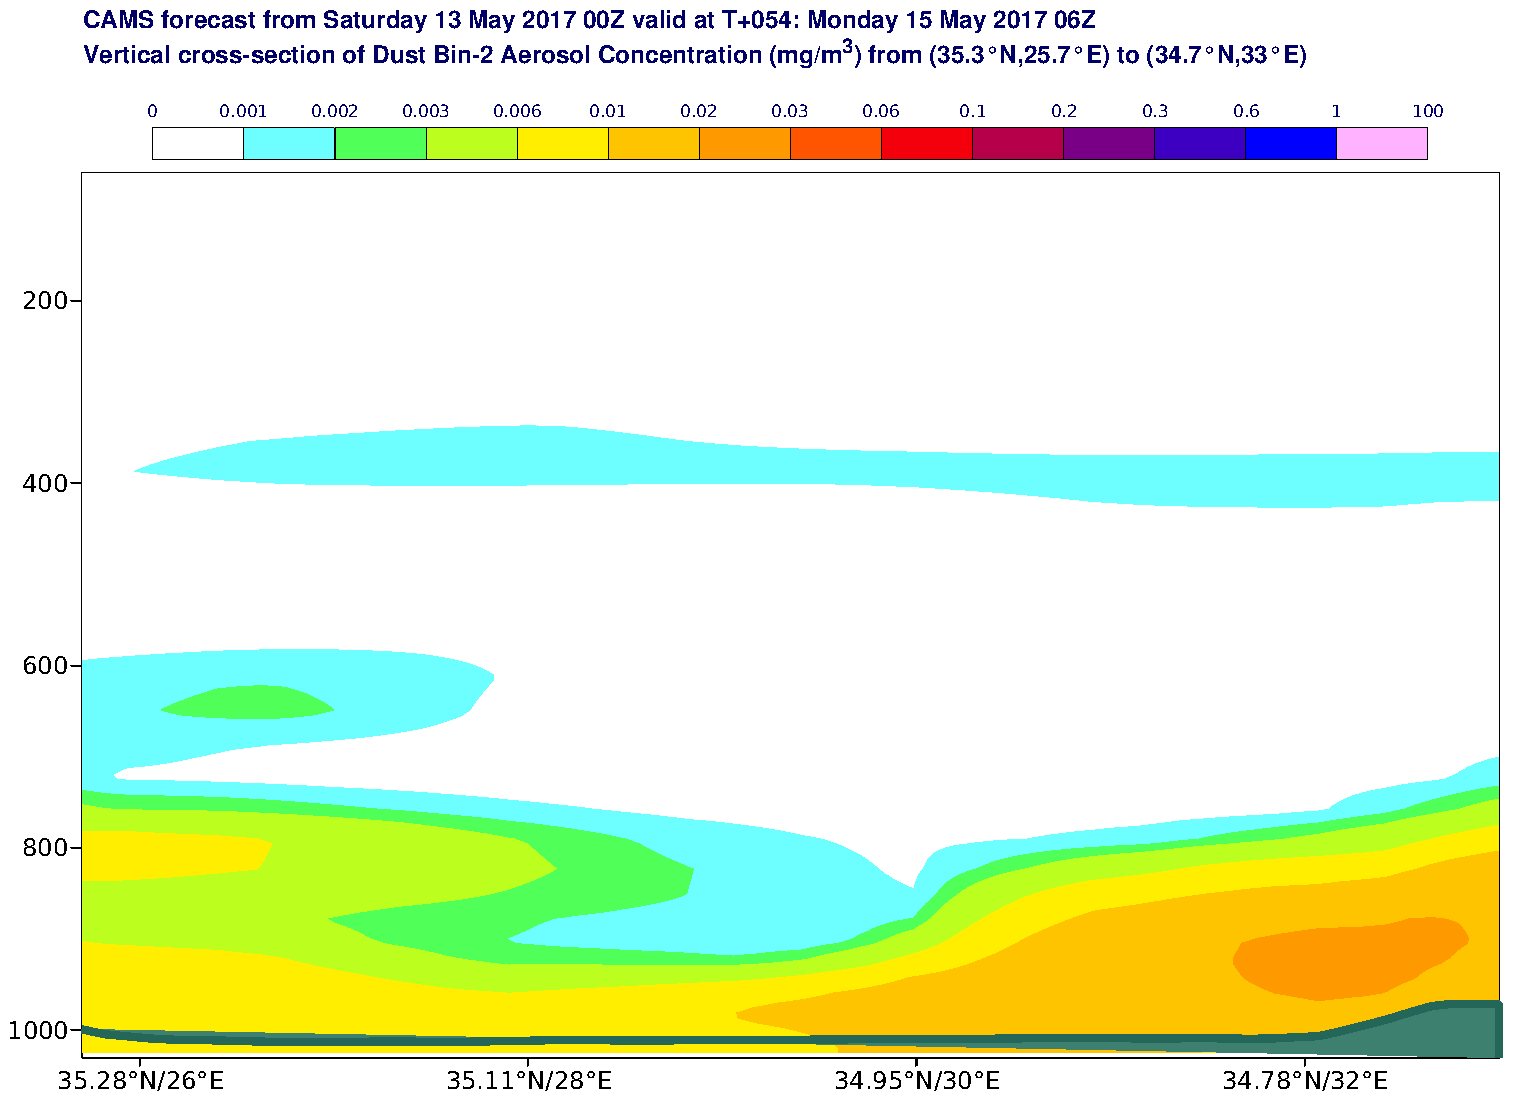 Vertical cross-section of Dust Bin-2 Aerosol Concentration (mg/m3) valid at T54 - 2017-05-15 06:00